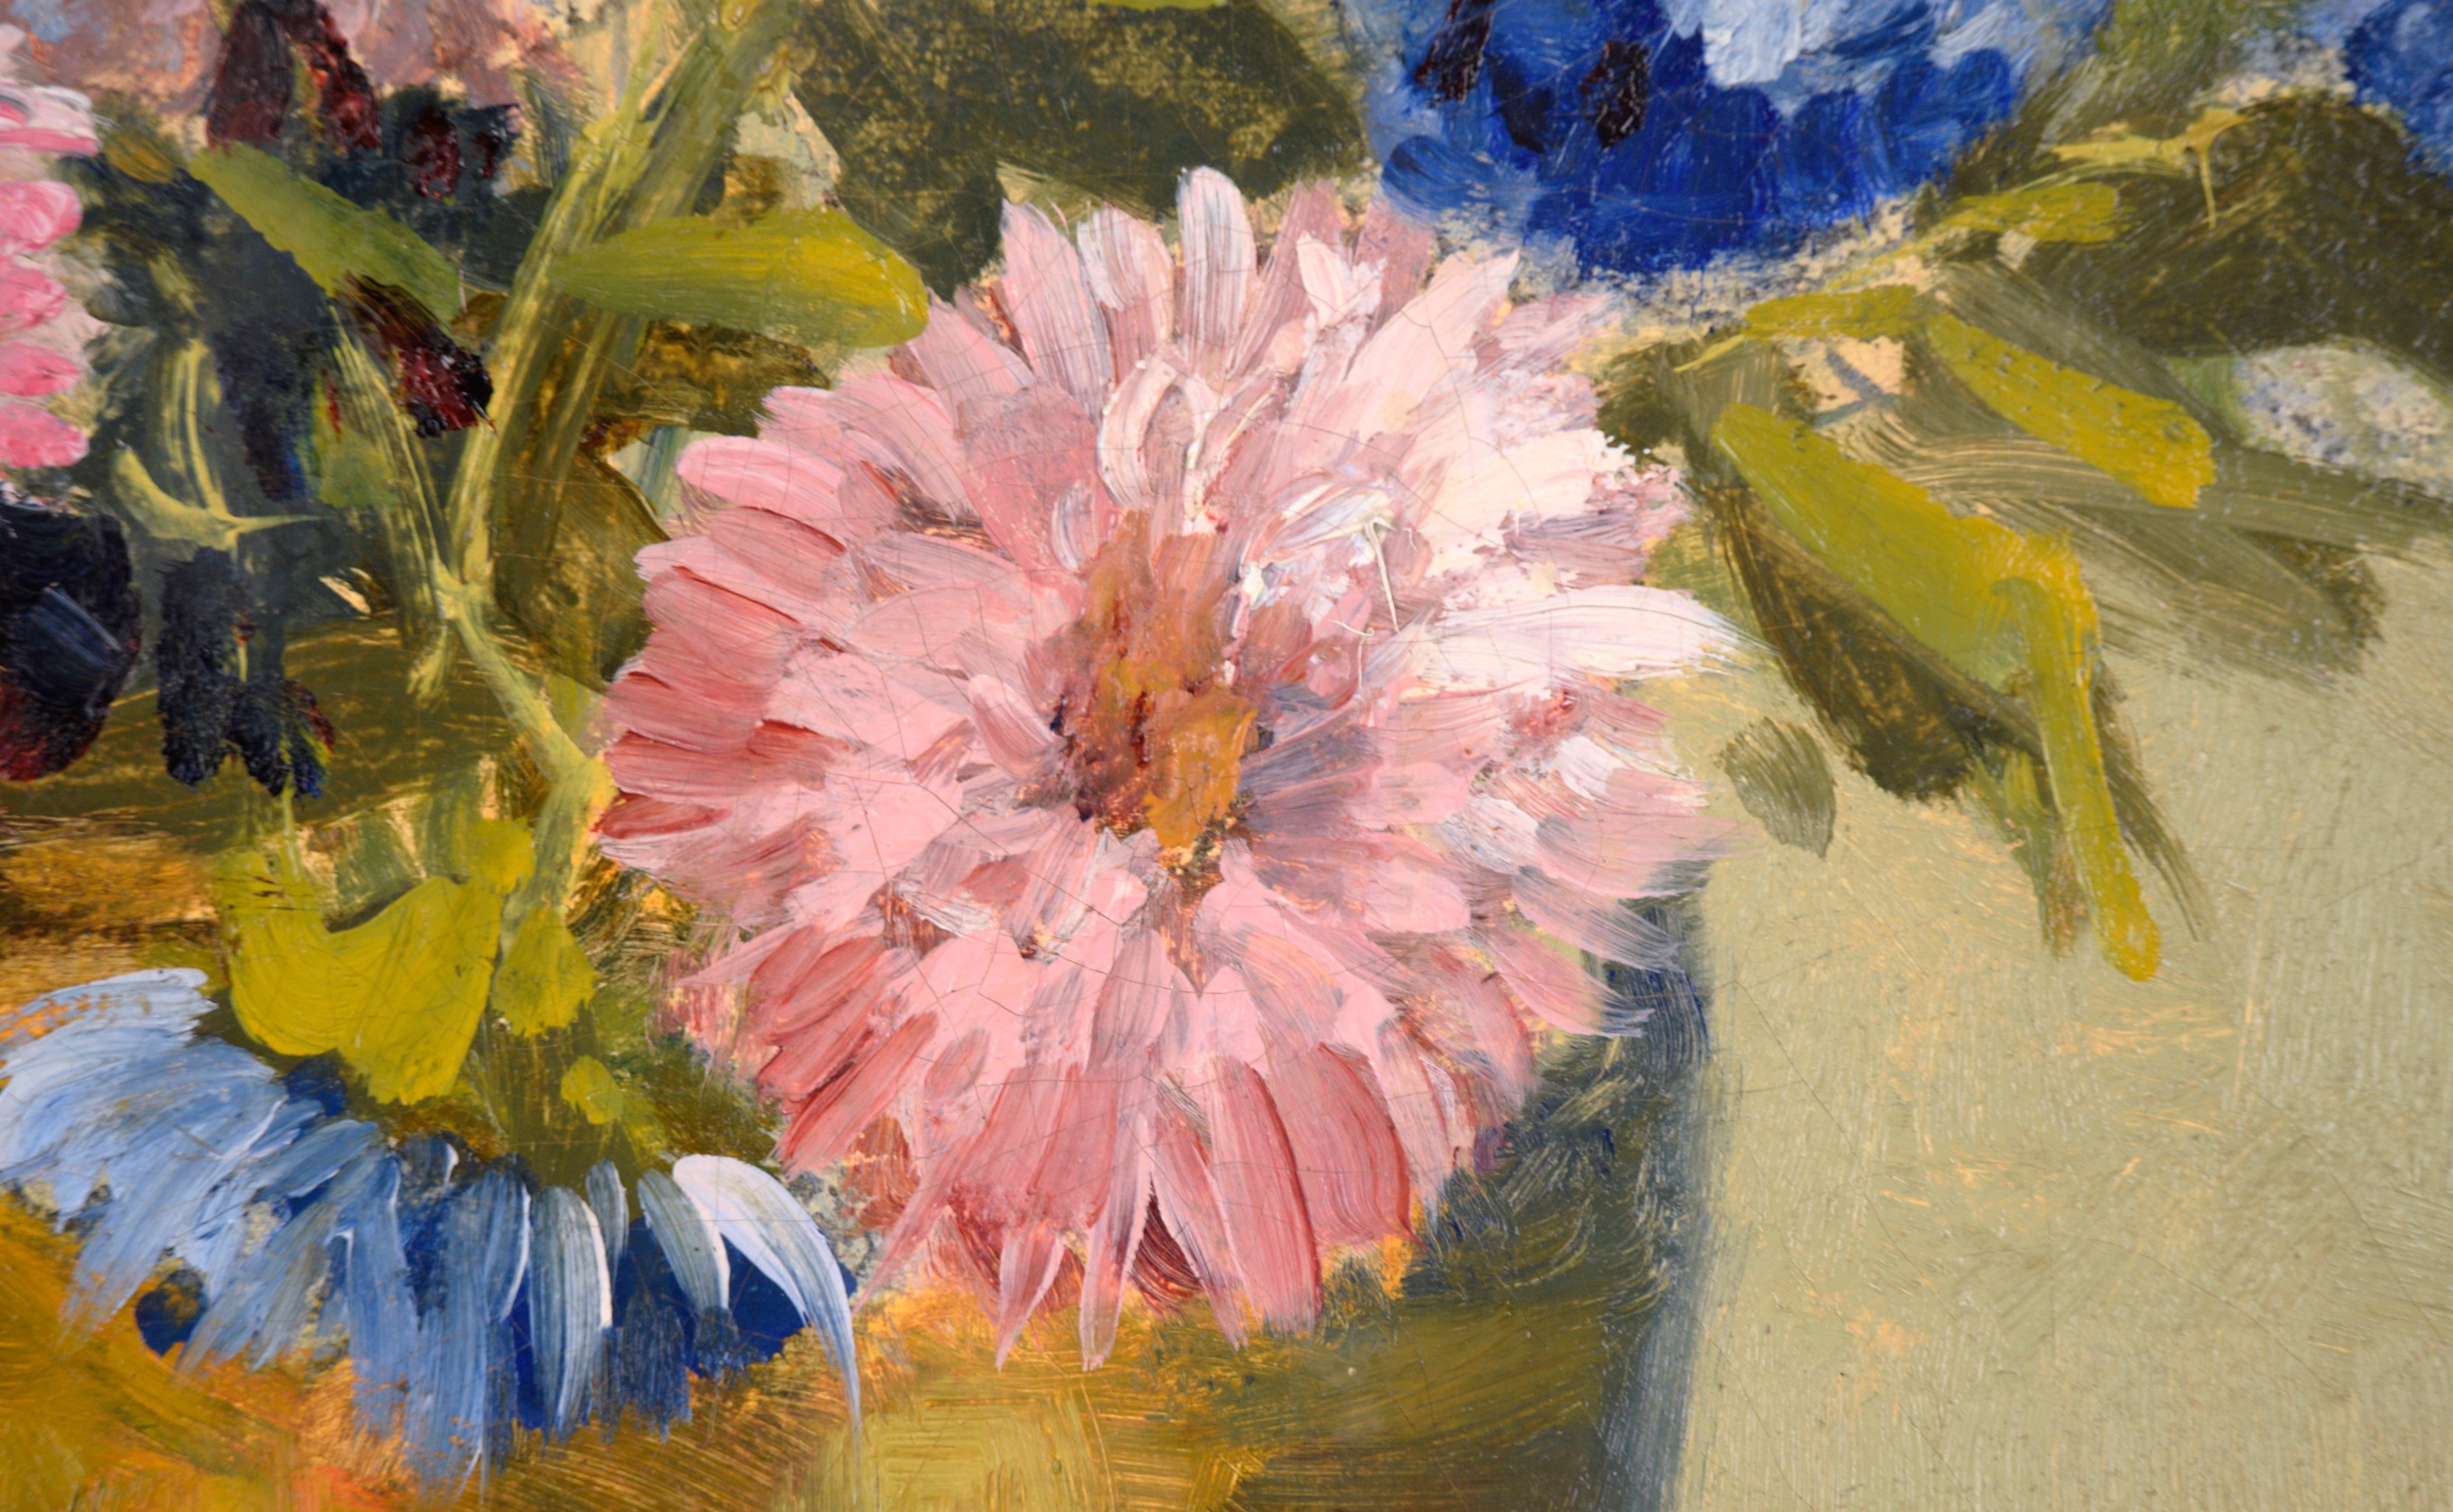 Floral Still Life with Peonies - Brown Still-Life Painting by A Murray